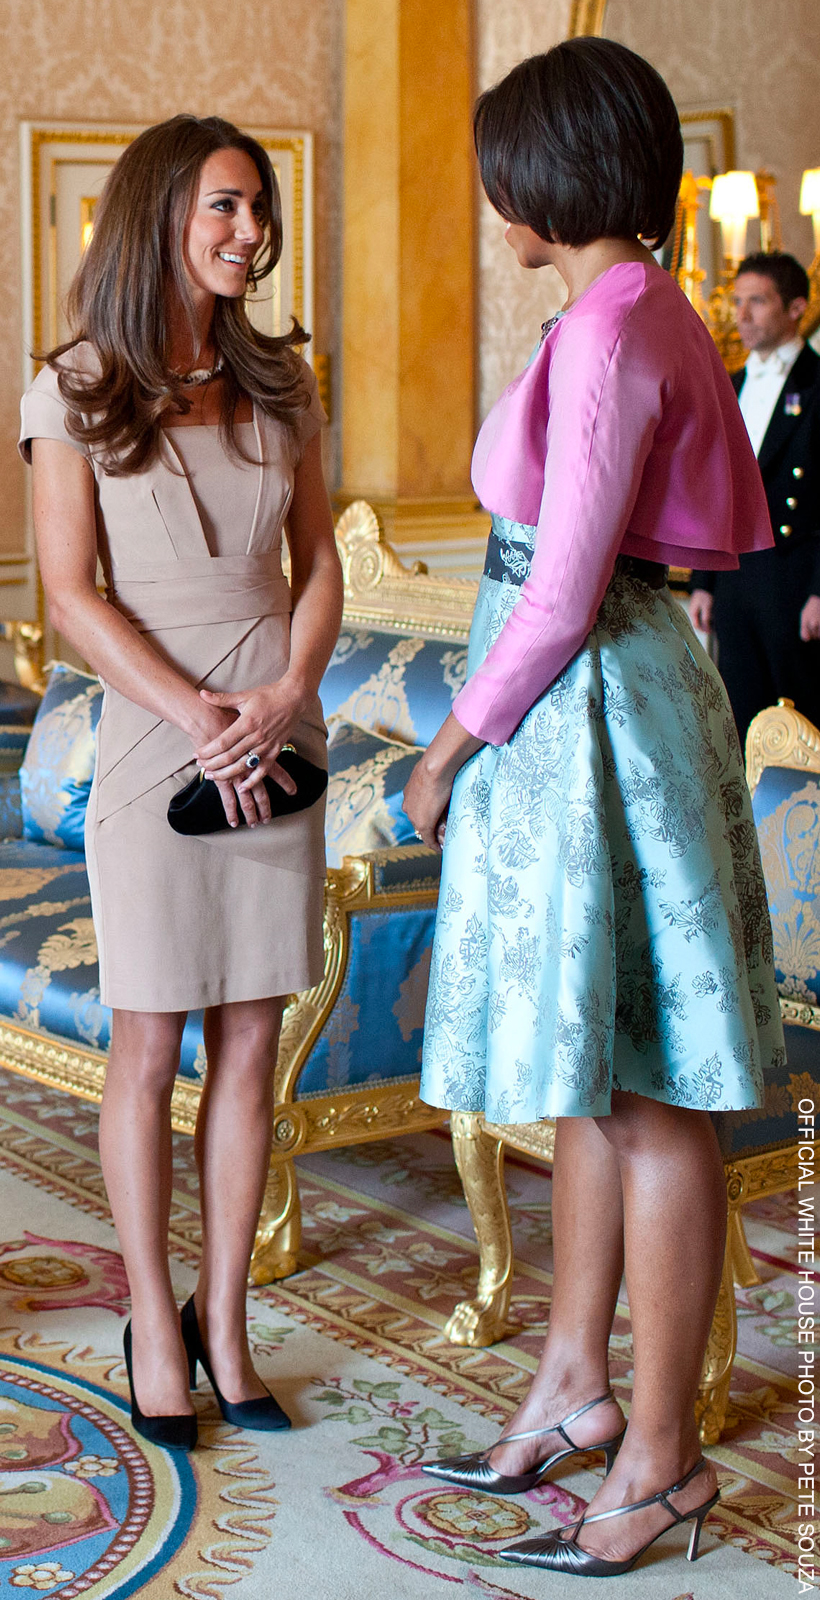 Princess Kate in a beige knee-length dress, speaking to Michelle Obama. 